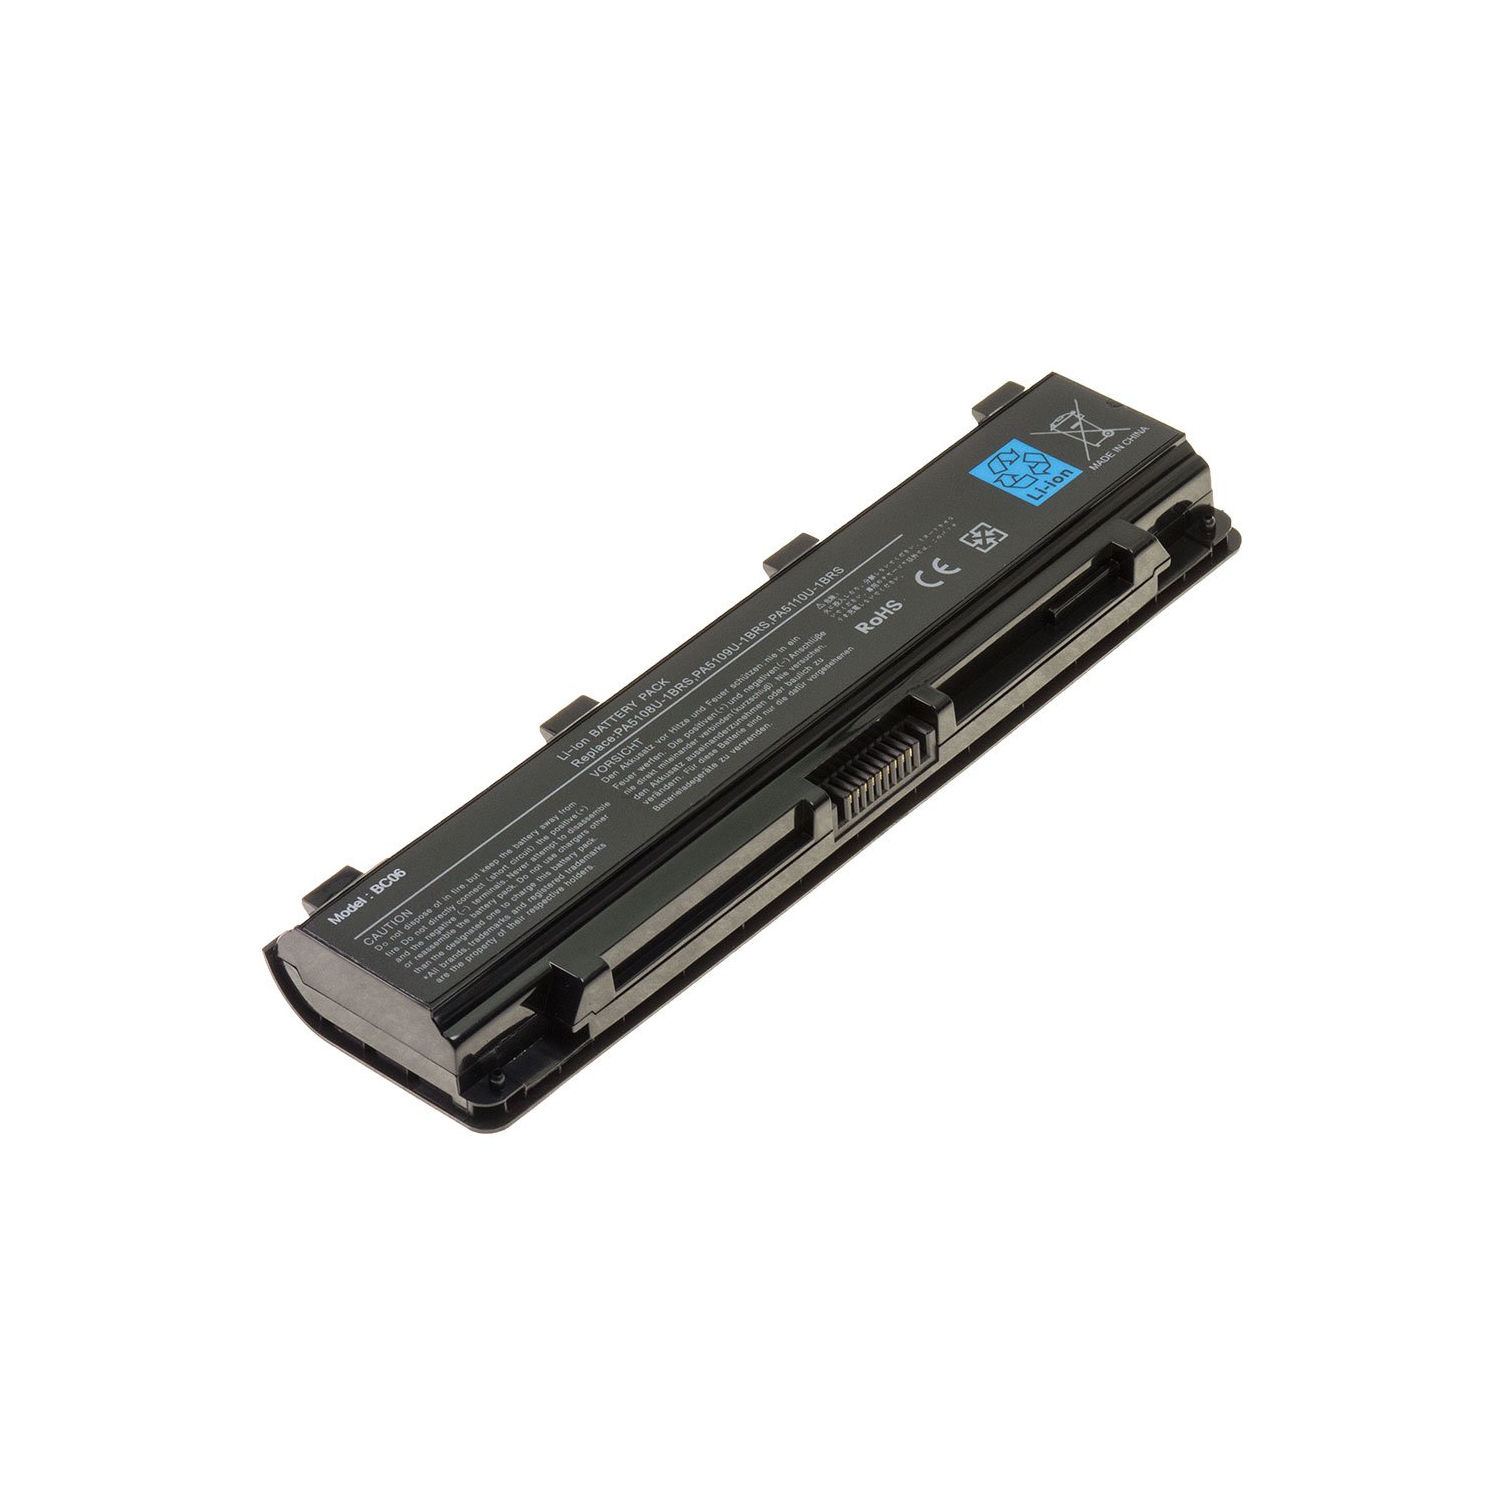 Laptop Battery for Toshiba Satellite C70-A-17R, PA5108U-1BRS, PA5109U-1BRS, PA5110U-1BRS, PABAS271, PABAS272, PABAS273